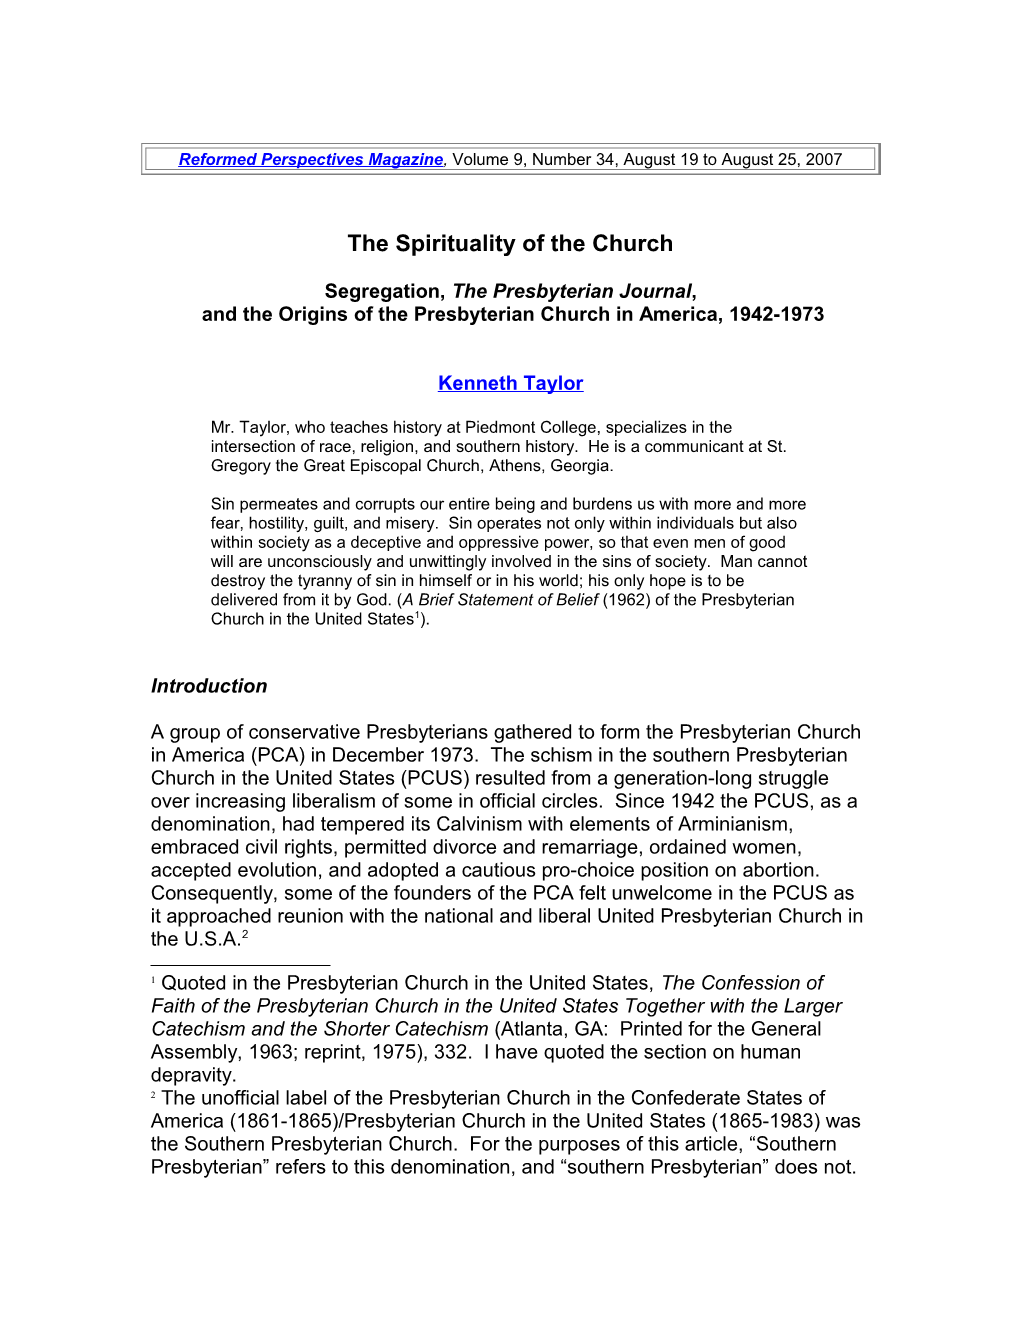 The Spirituality of the Church Segregation, the Presbyterian Journal, and the Origins